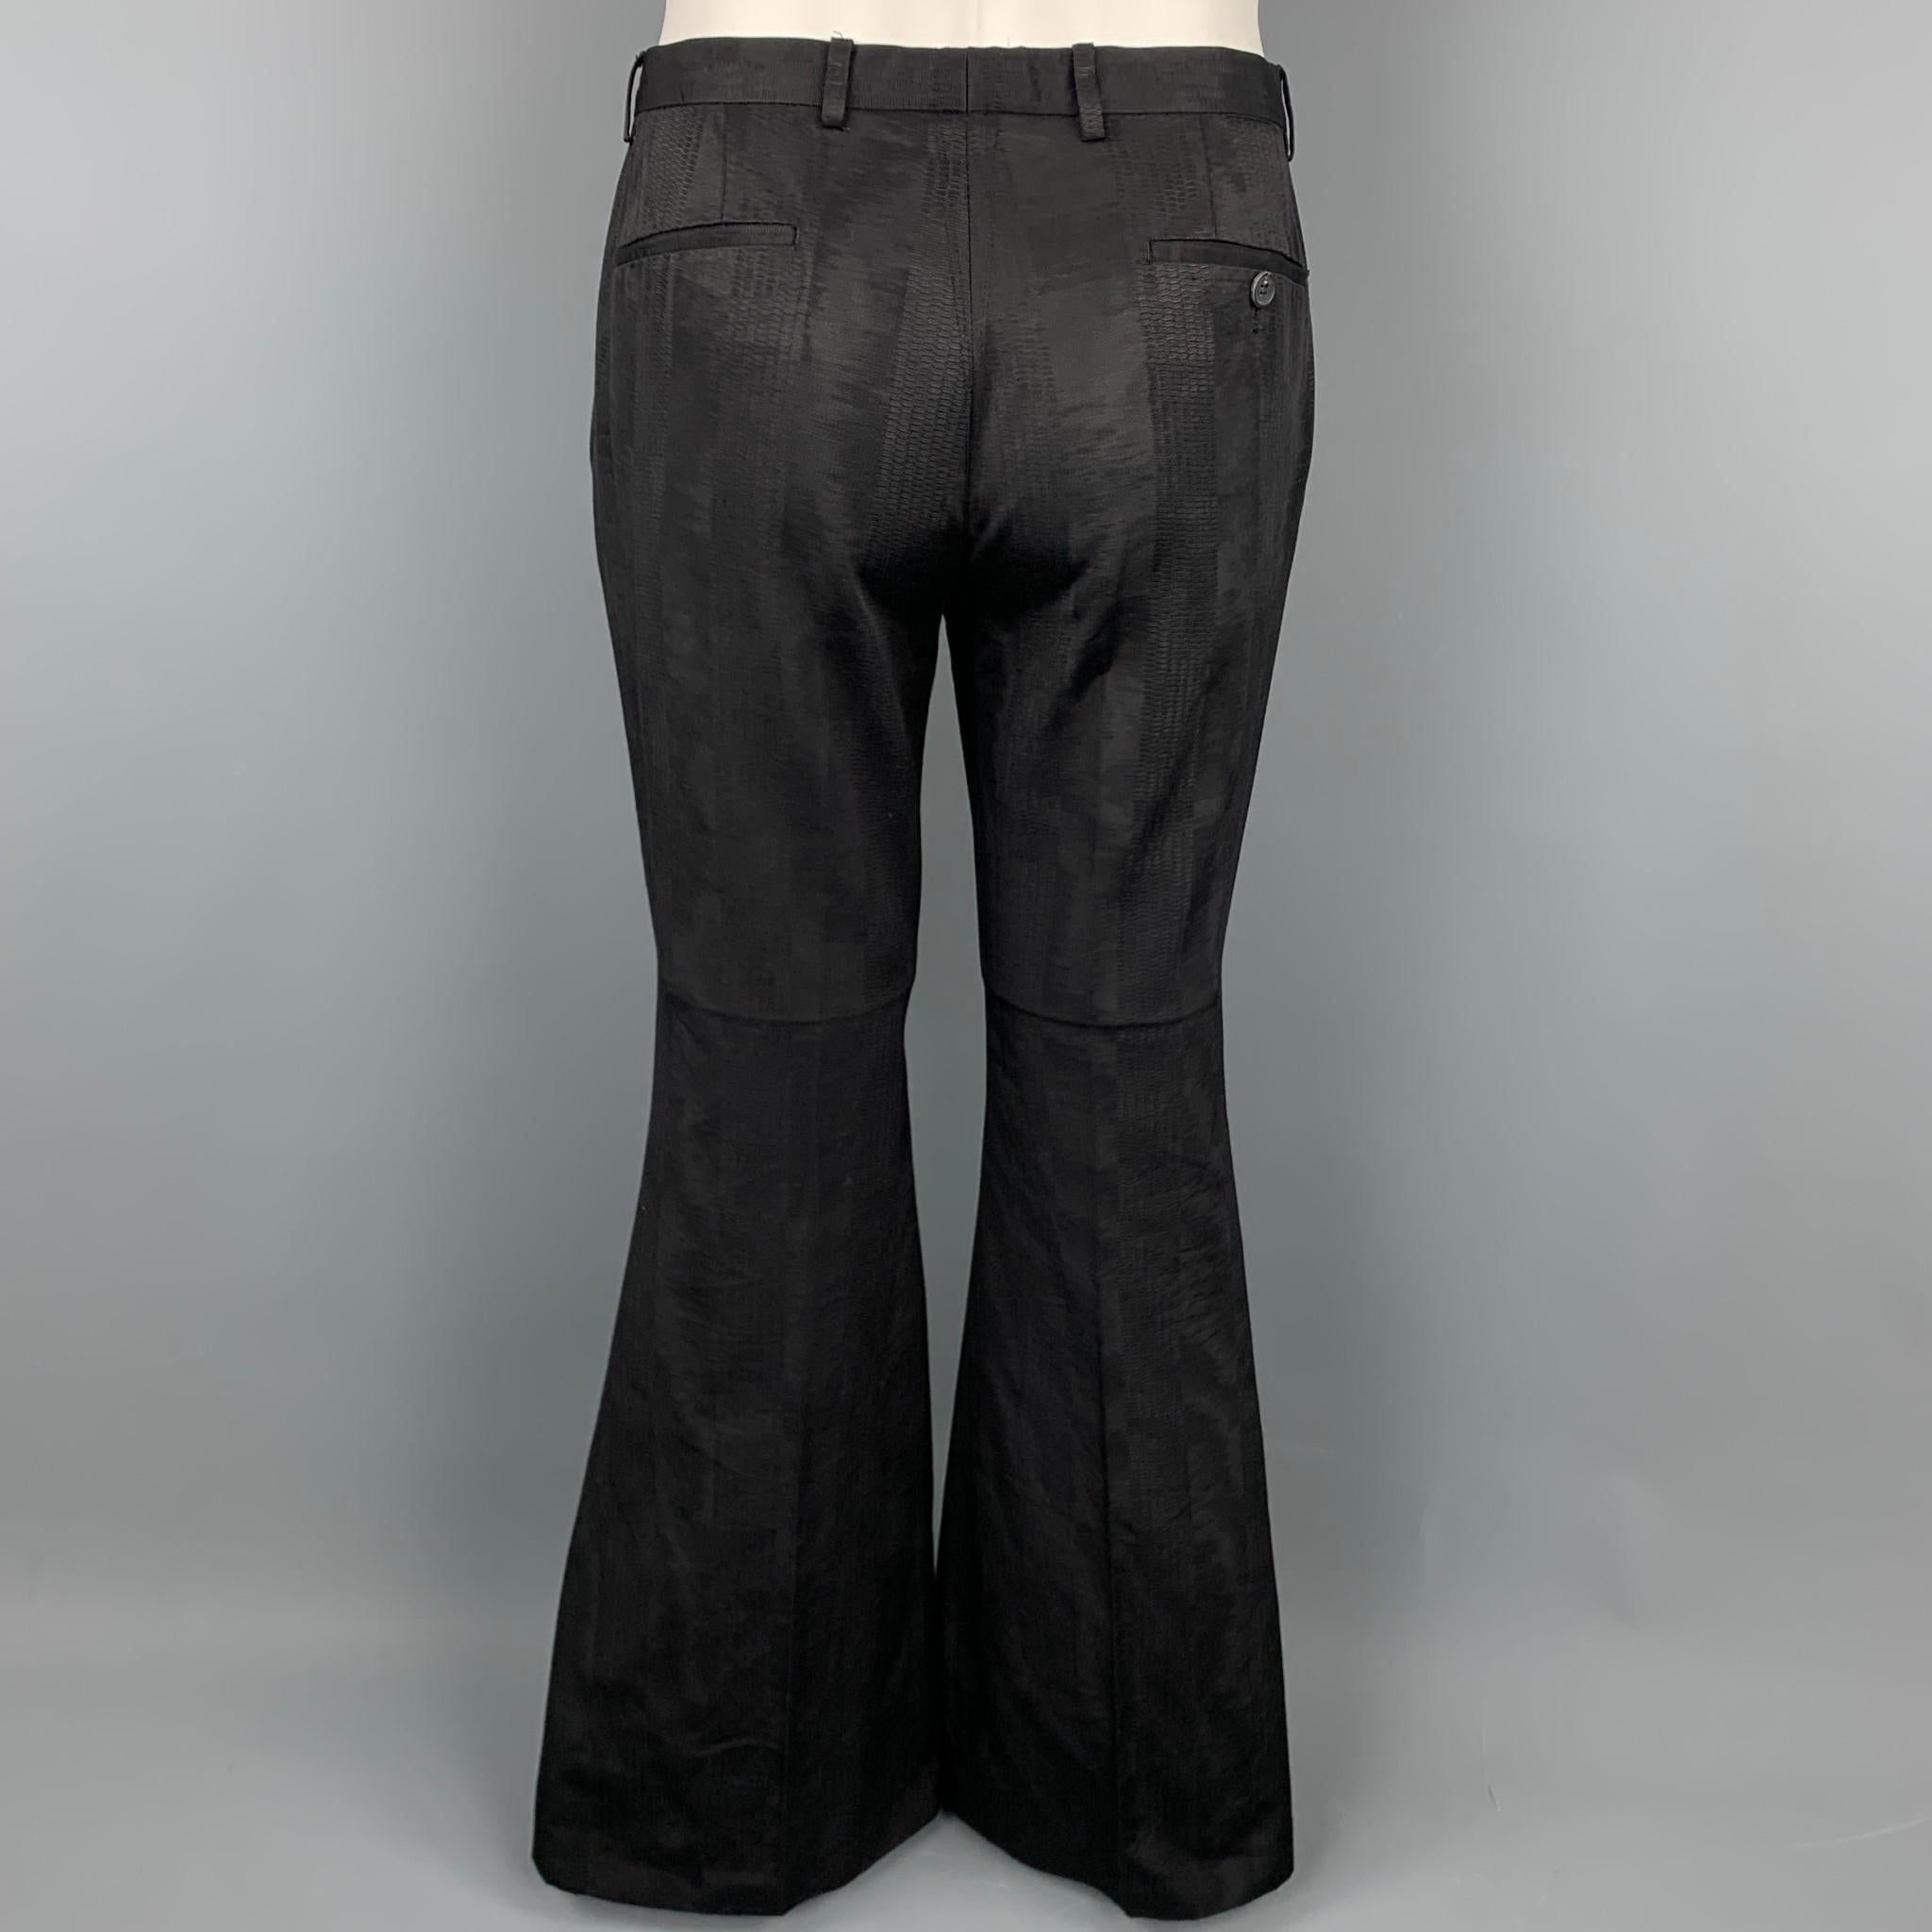 gucci tom ford chaps